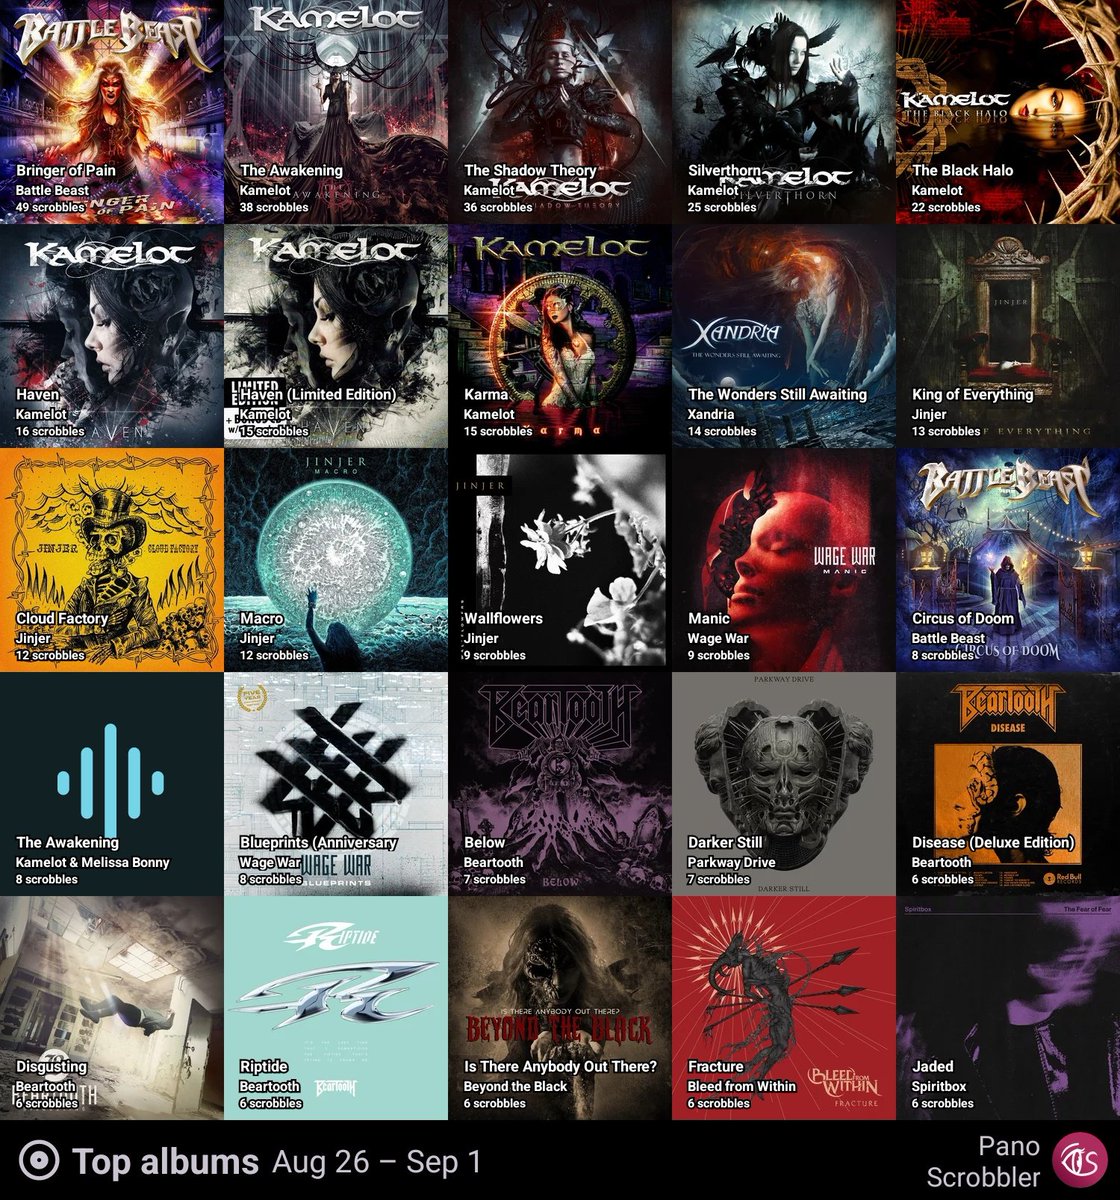 My week at a glance! #5x5 not sure why the #doubtme Beartooth single isn't on here #lastfm messed up!